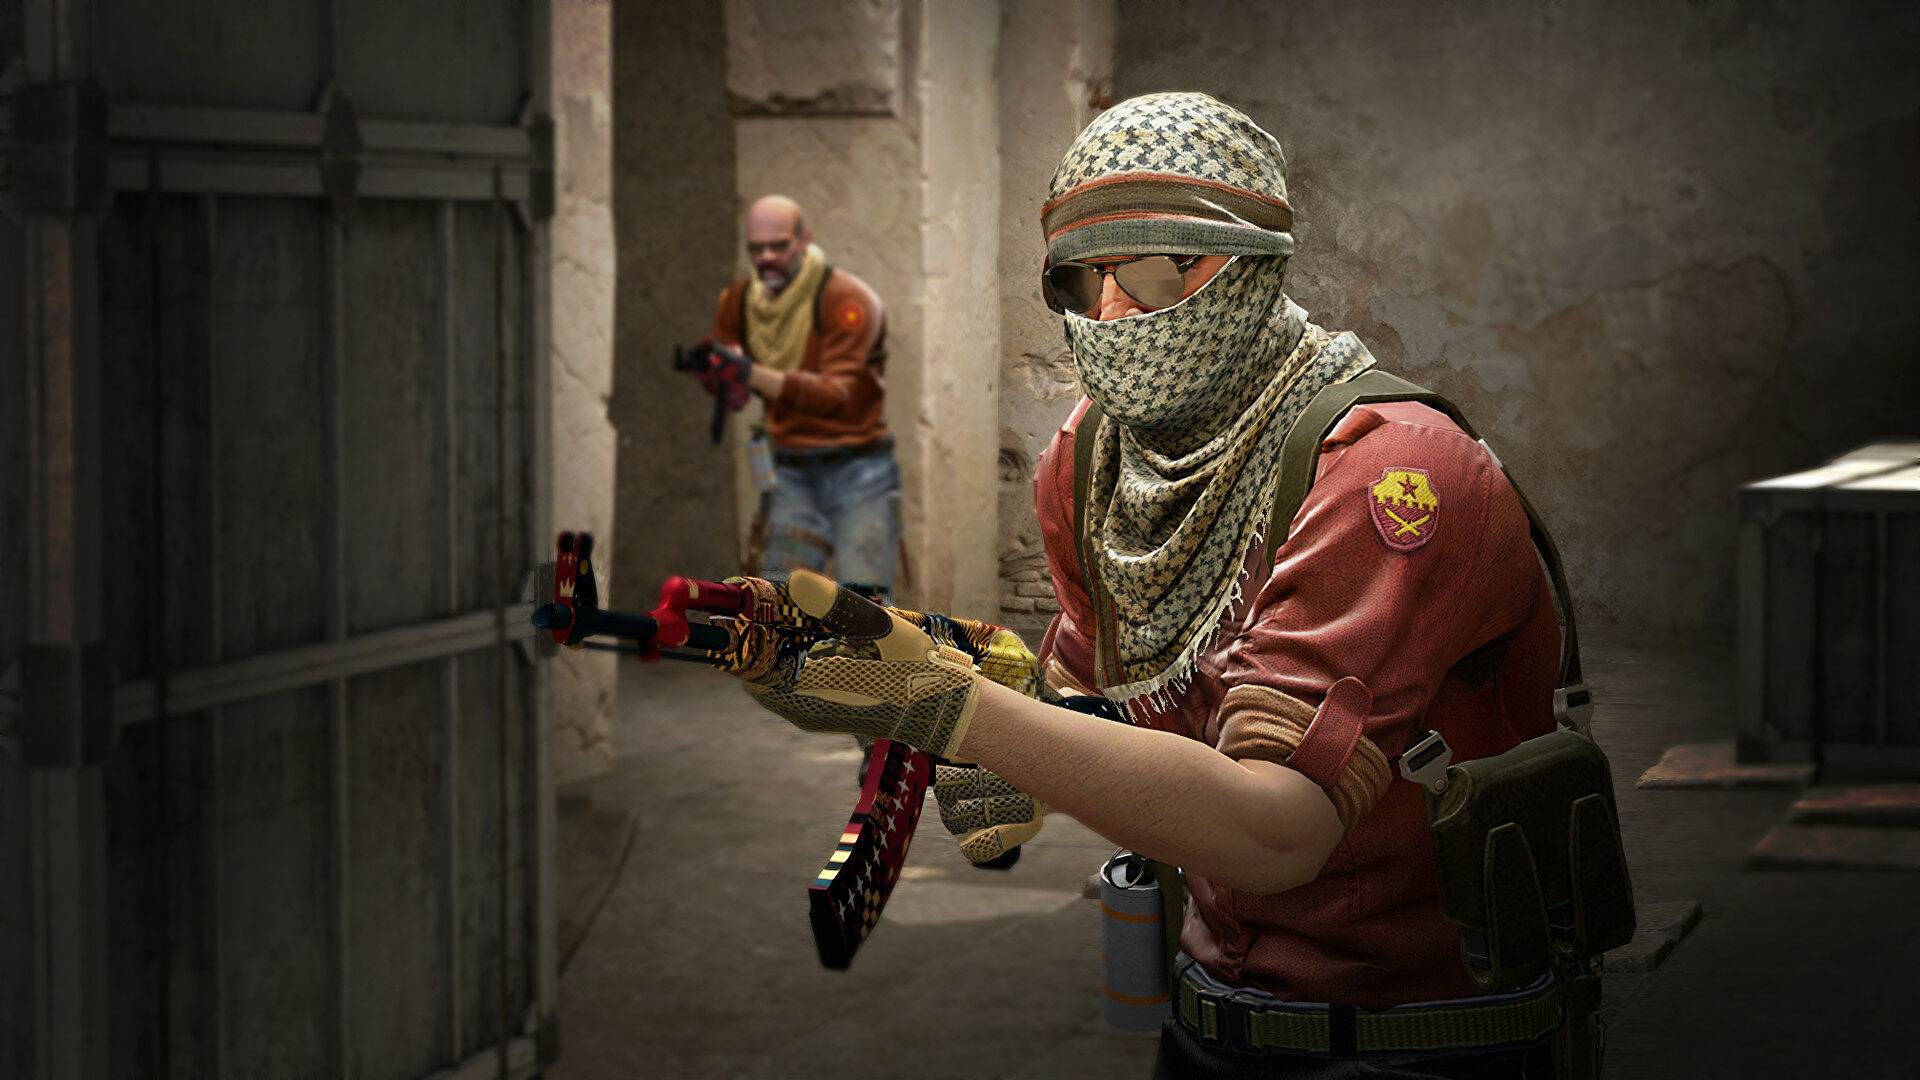 There are new rumors Counter-Strike 2 could launch this month with a beta